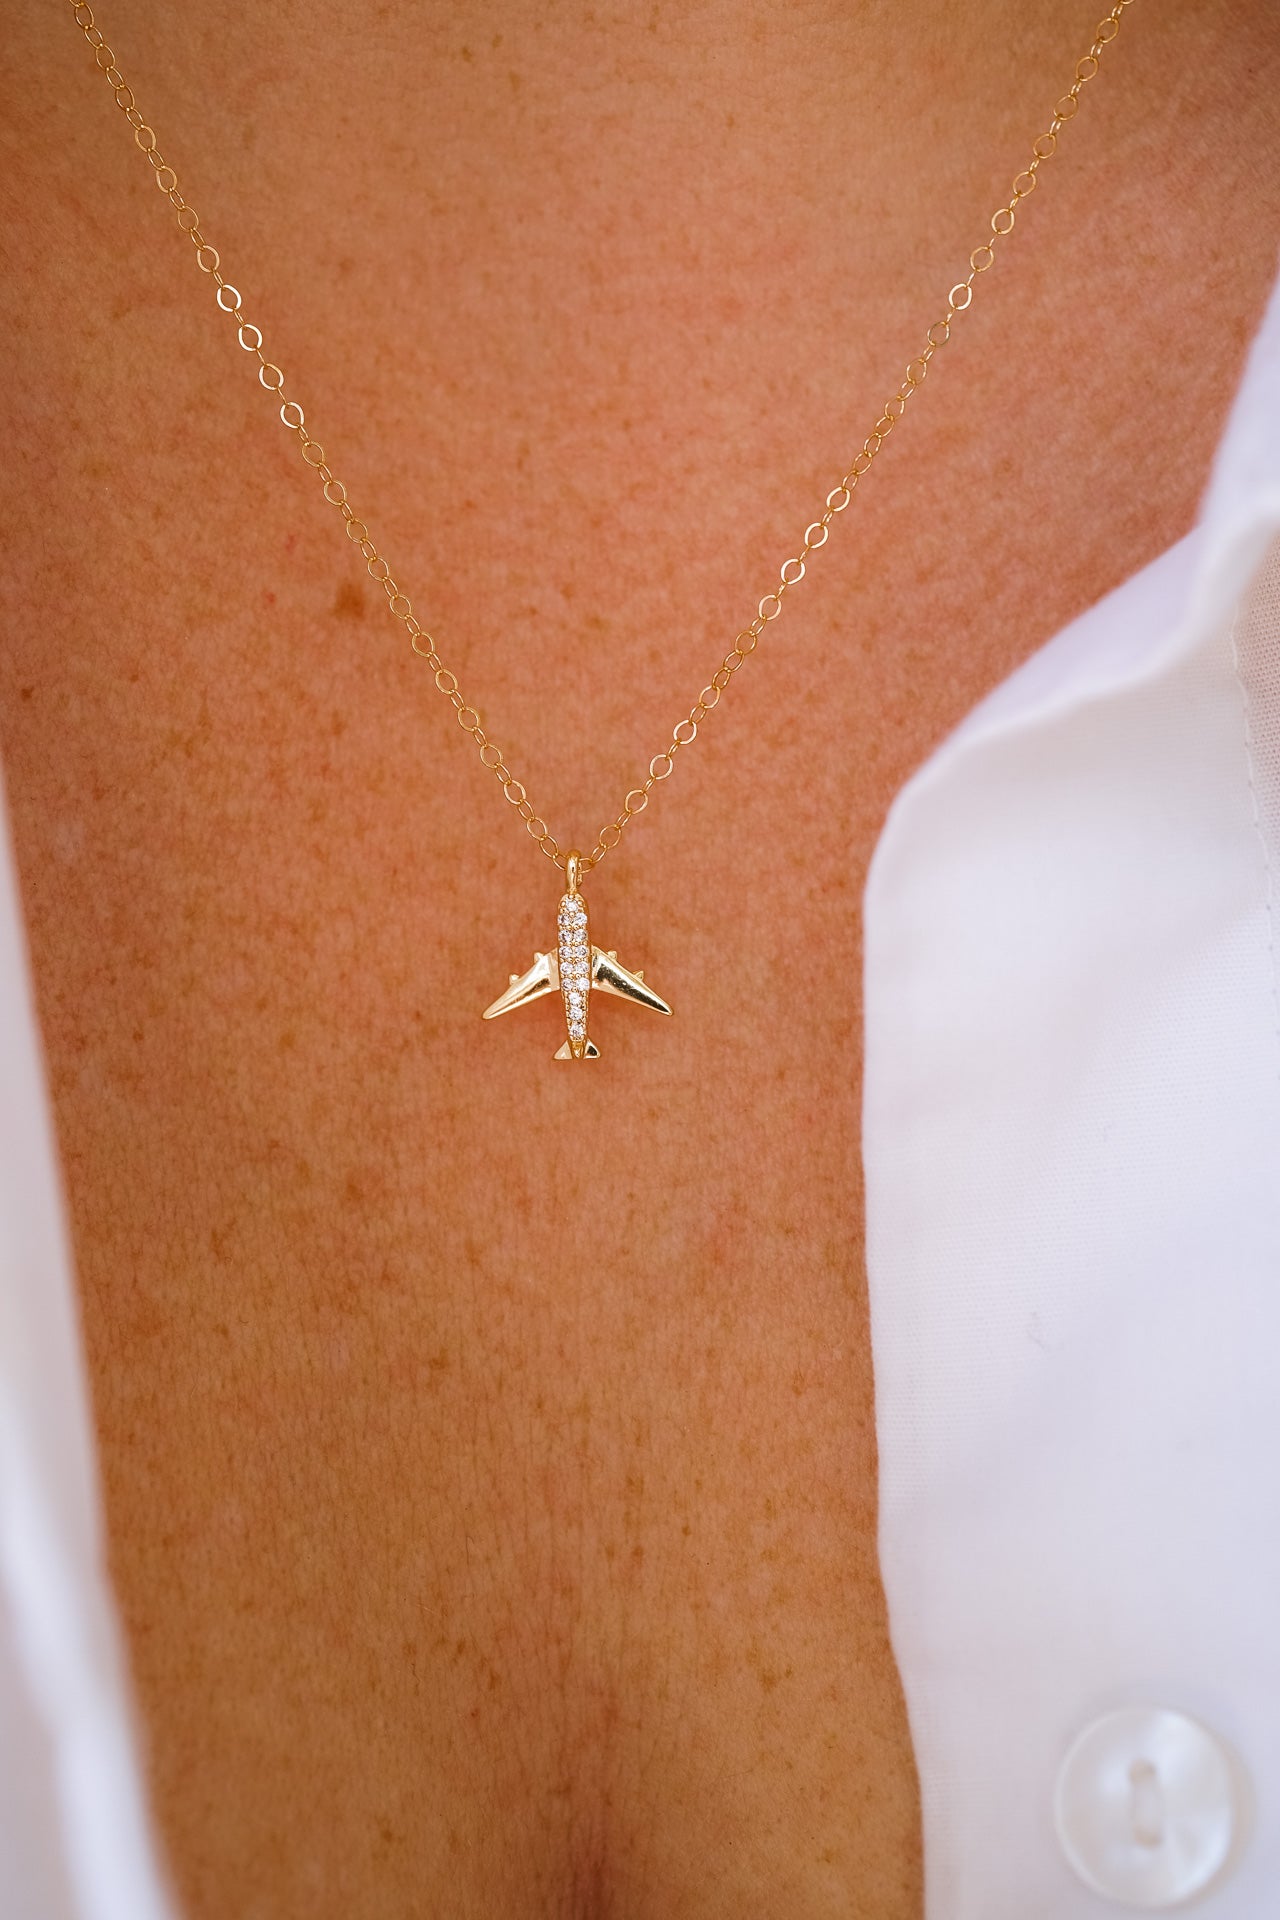 Amazon.com: Bodyslam Vintage Women Gold Airplane Pendant Layered Necklace  Tiny Dainty Jewelry Gift : Clothing, Shoes & Jewelry